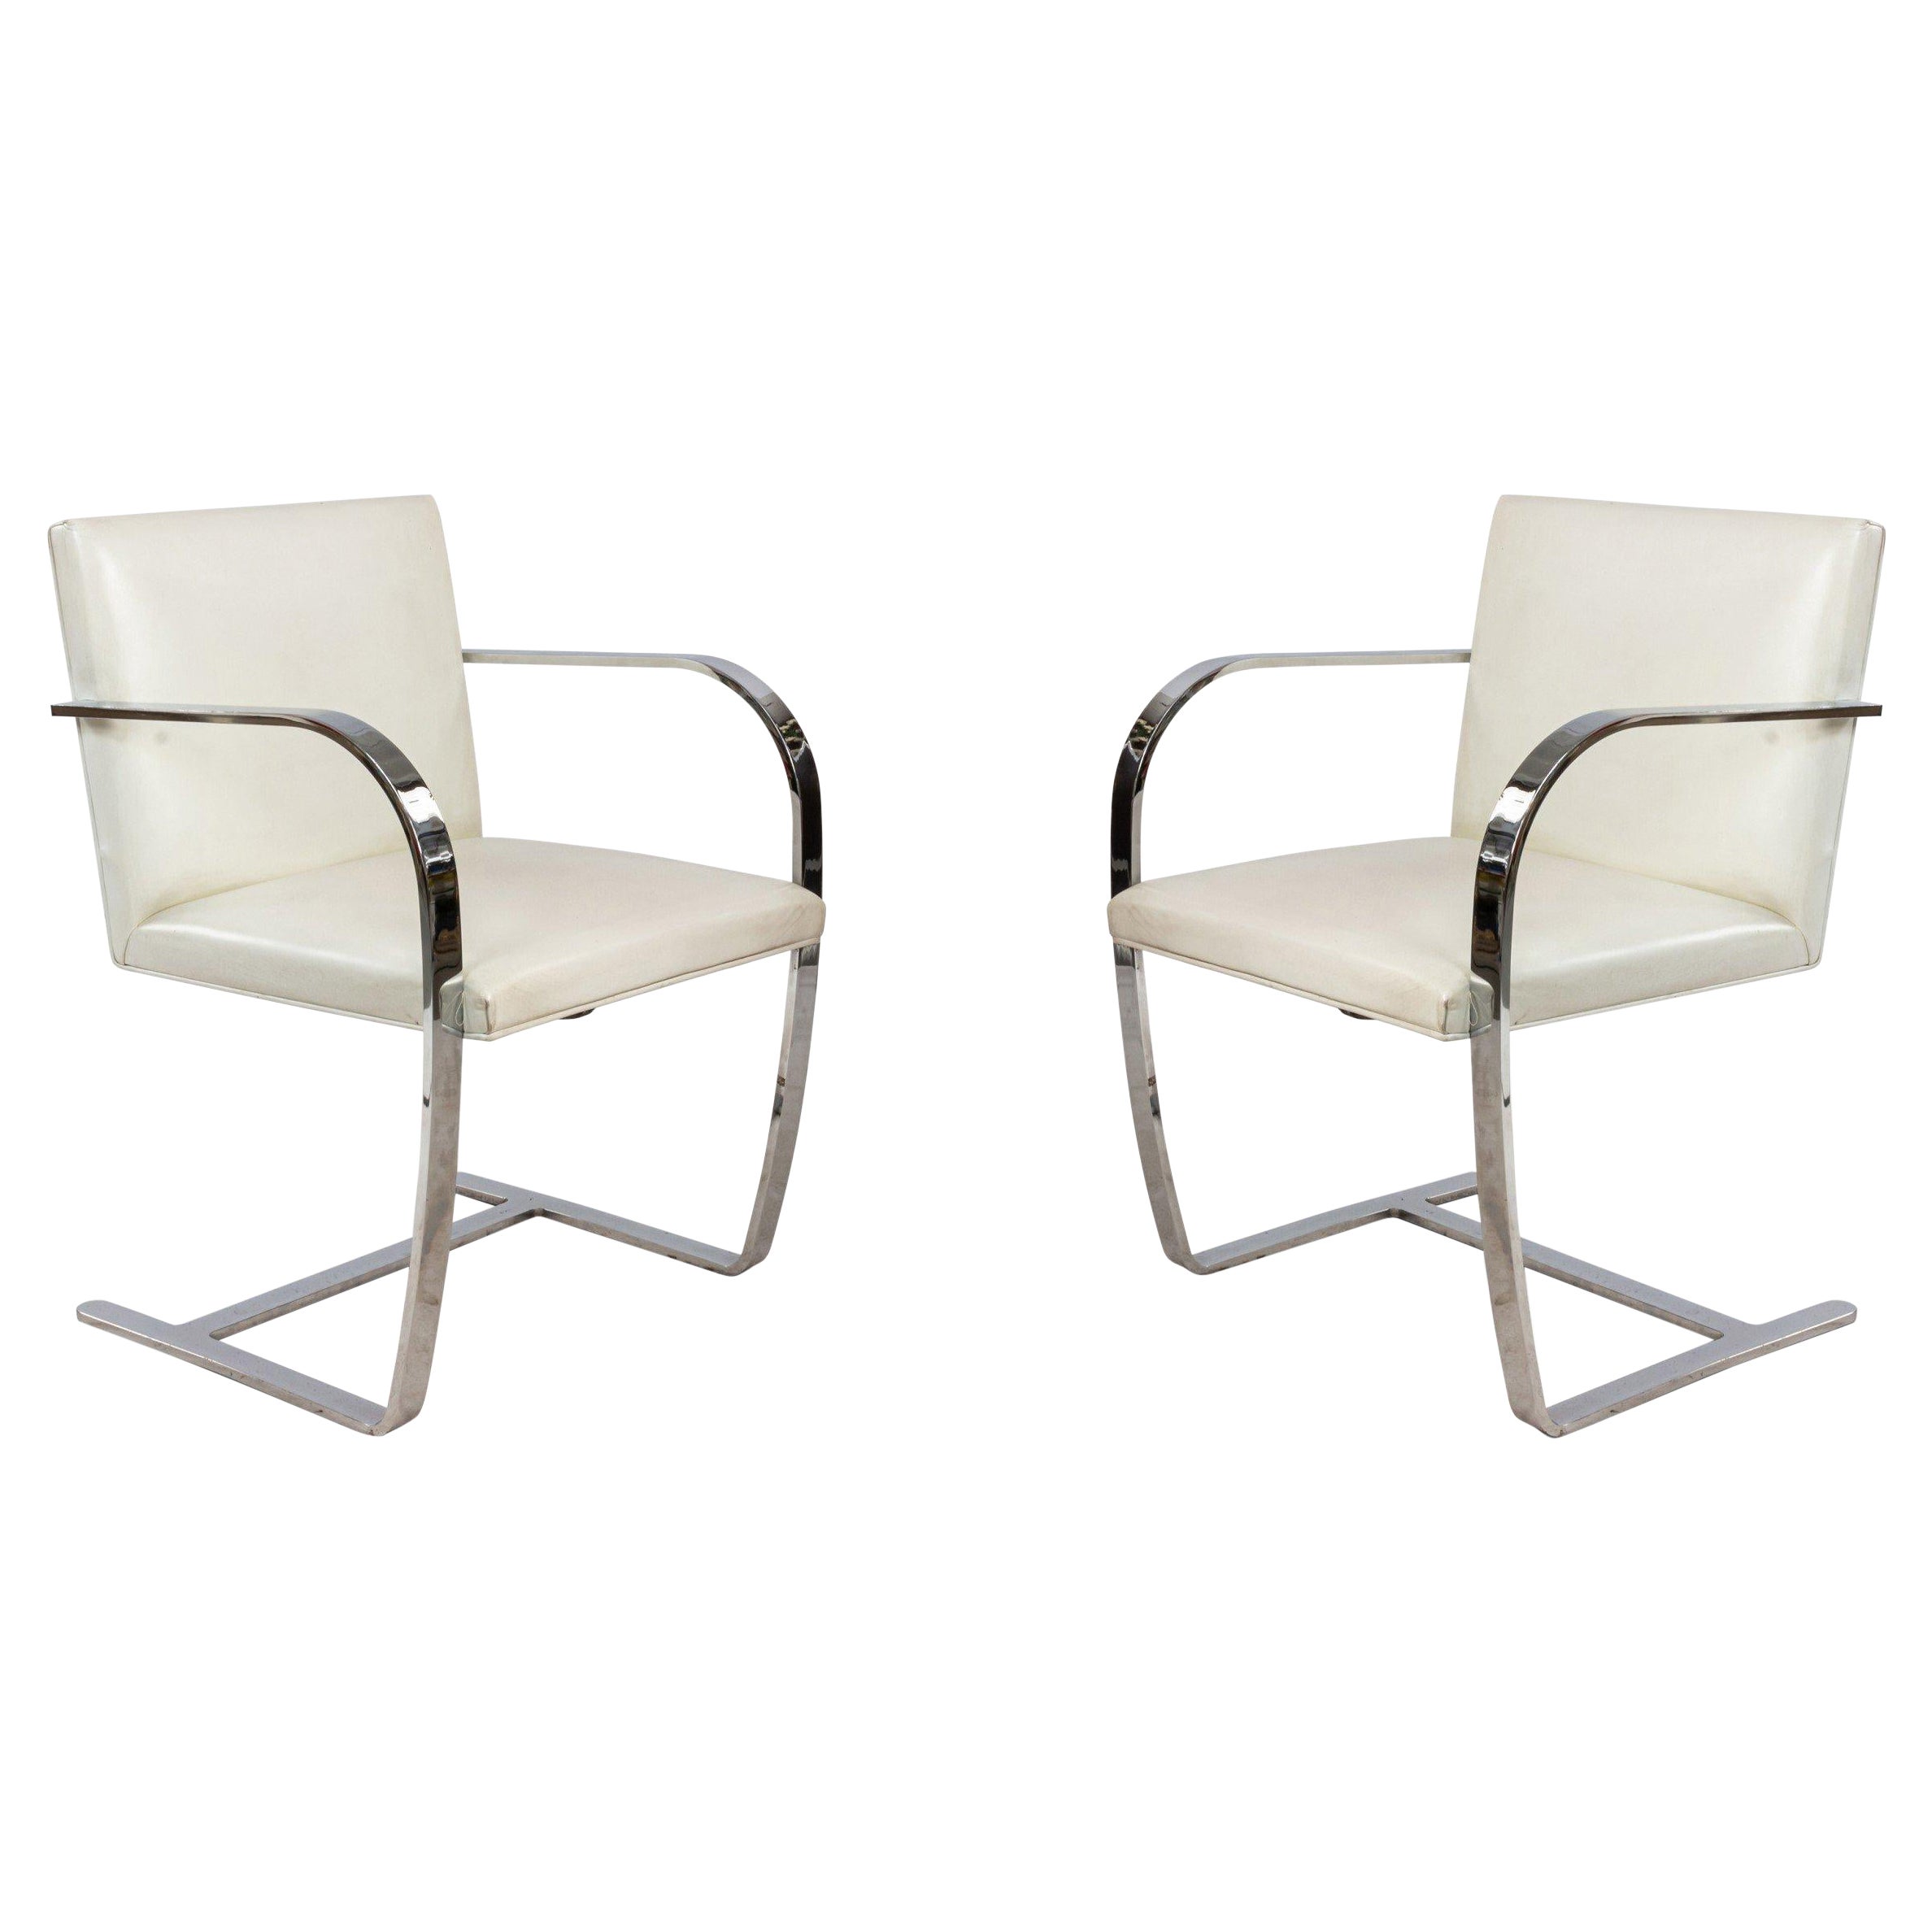 Set of 4 Mid-Century Chrome and White Leather Armchairs